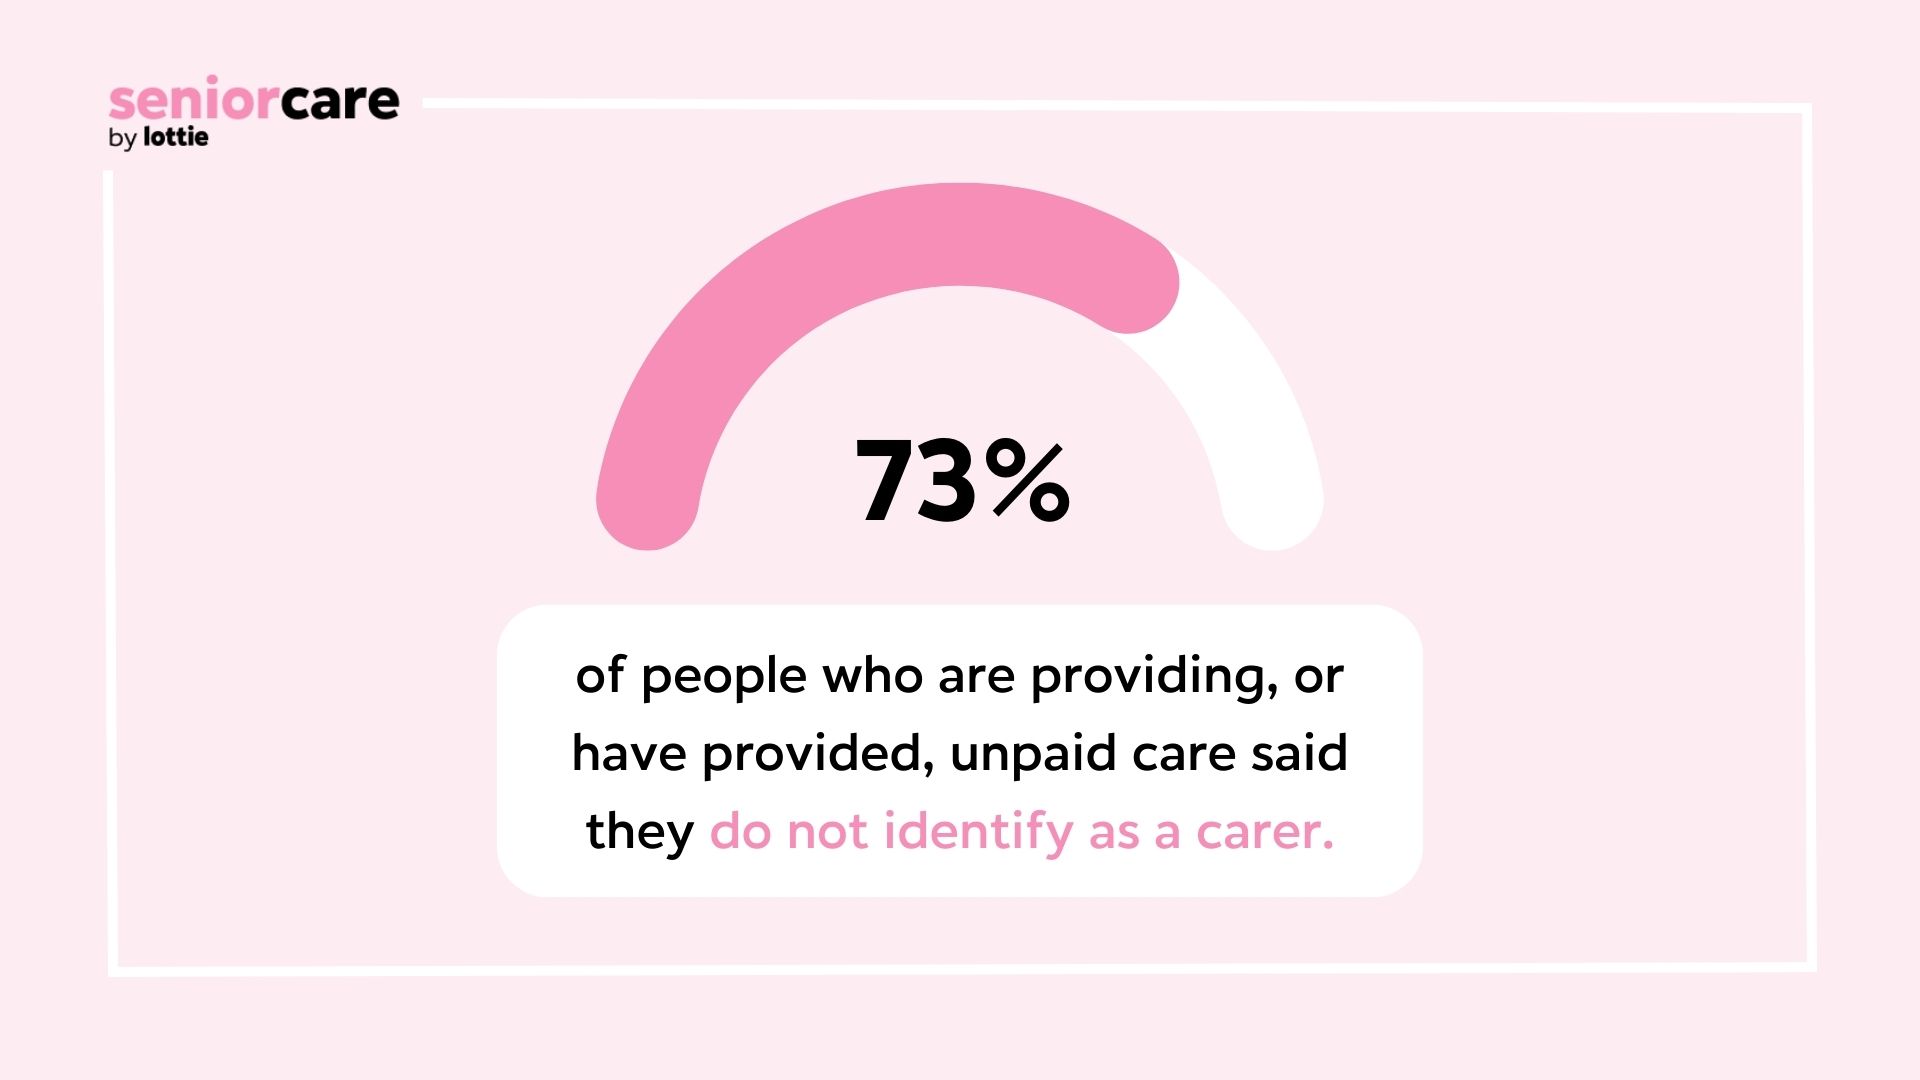 image showing 73% of people providing unpaid care do not identify as a carer